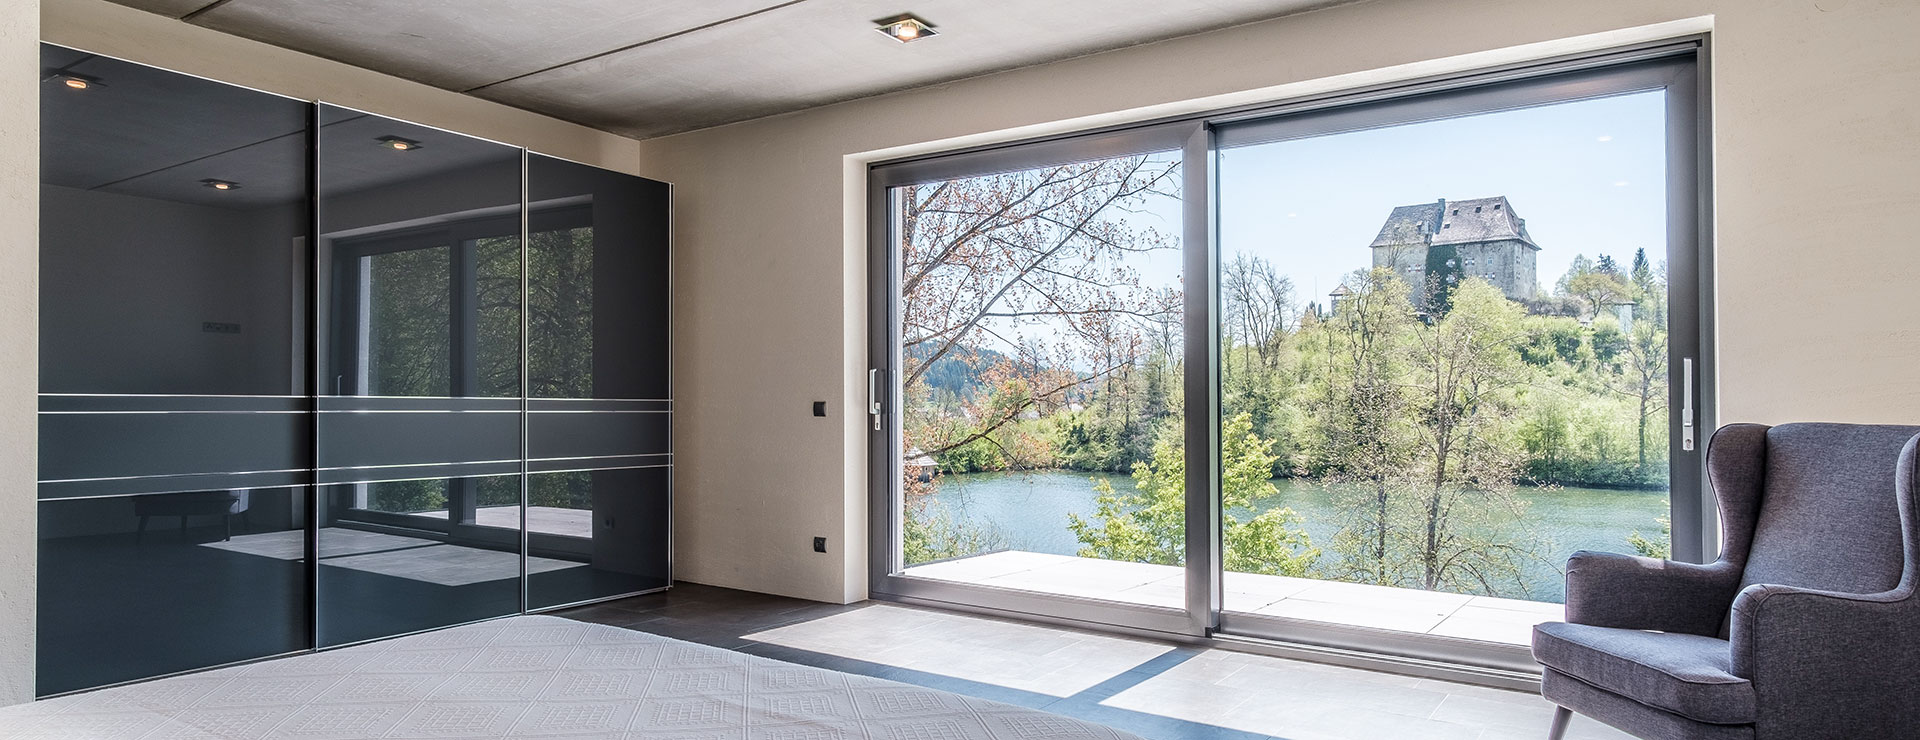 Design holiday home "The View" Villa Wörthersee Area